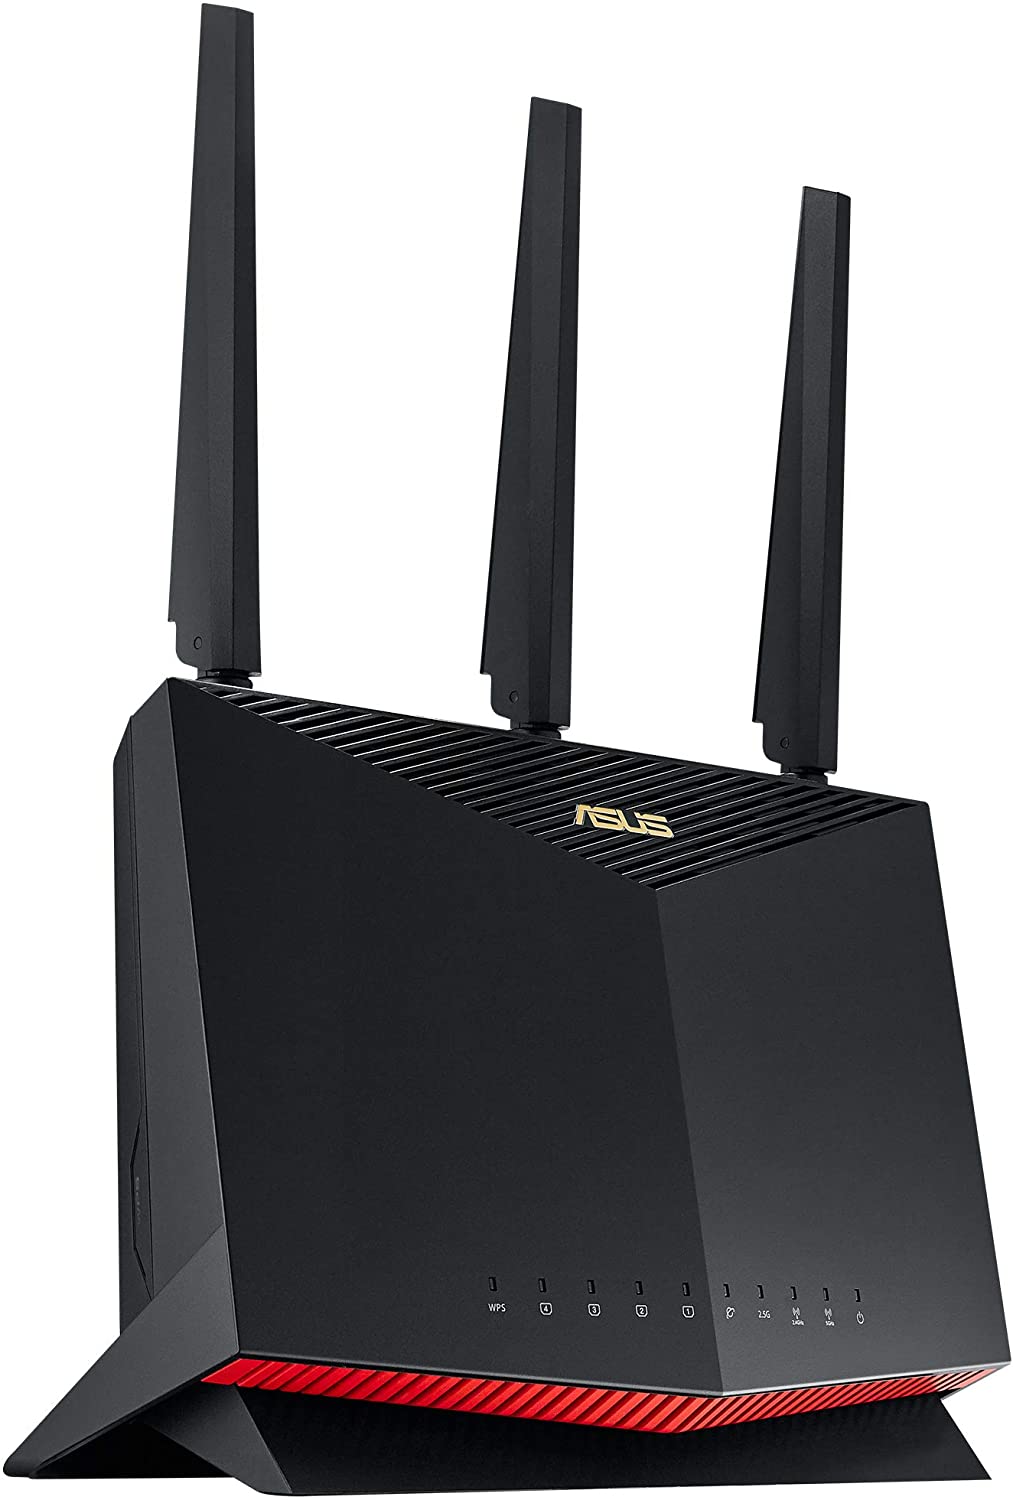 ROUTER INALAMBRICO ASUS RT-AX86U DUAL BAND WI-FI GAMING 2.4 Y 5 GHZ